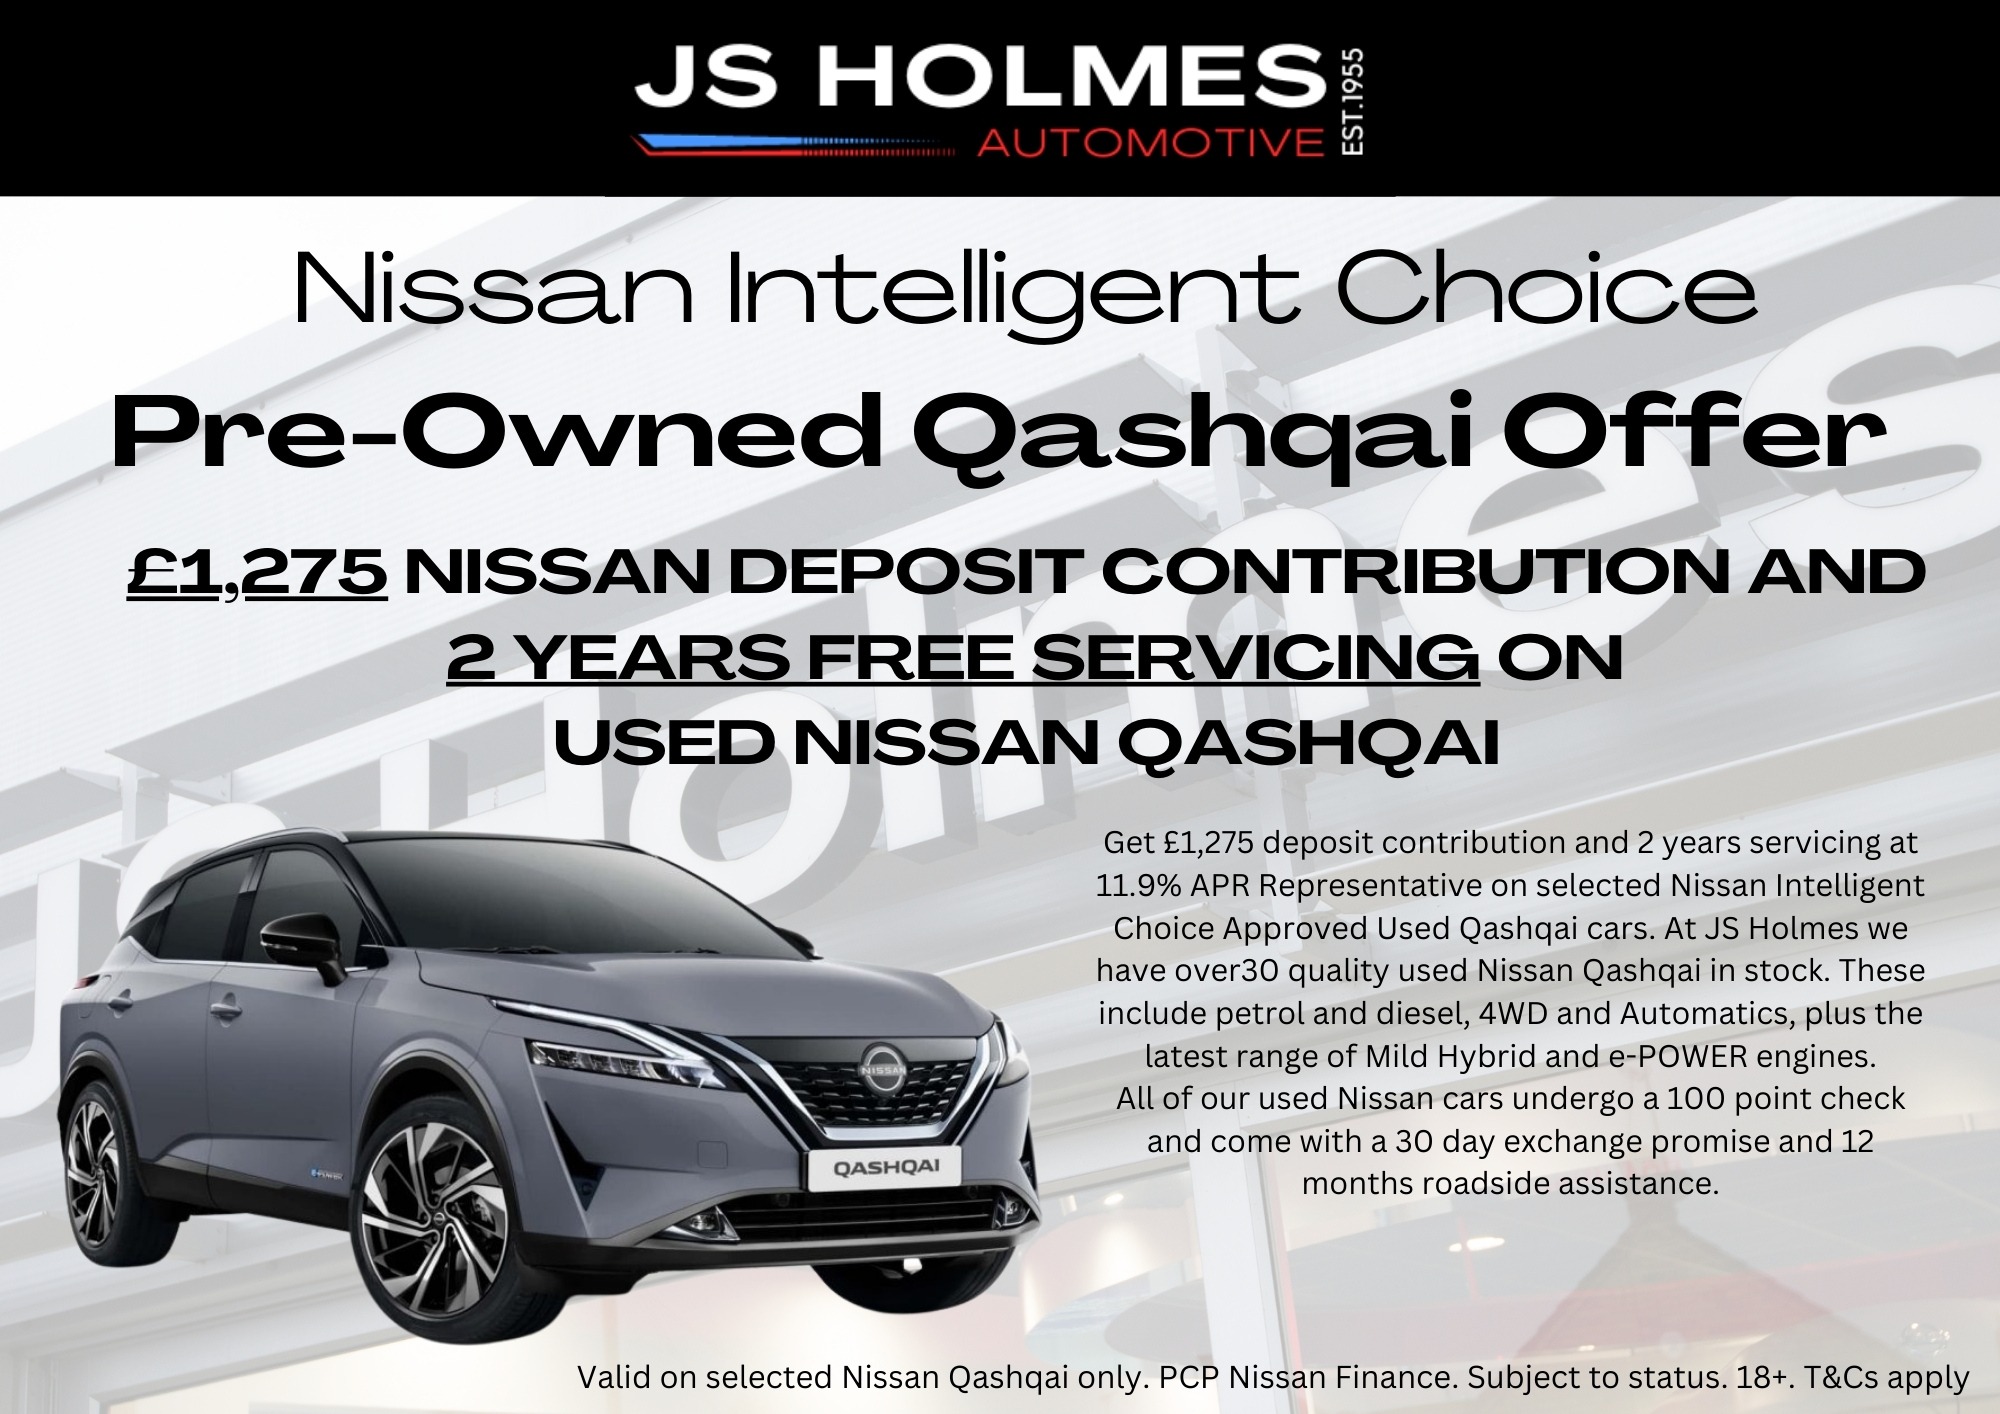 £1,275 NISSAN DEPOSIT CONTRIBUTION AND  2 YEARS FREE SERVICING ON  USED NISSAN QASHQAI